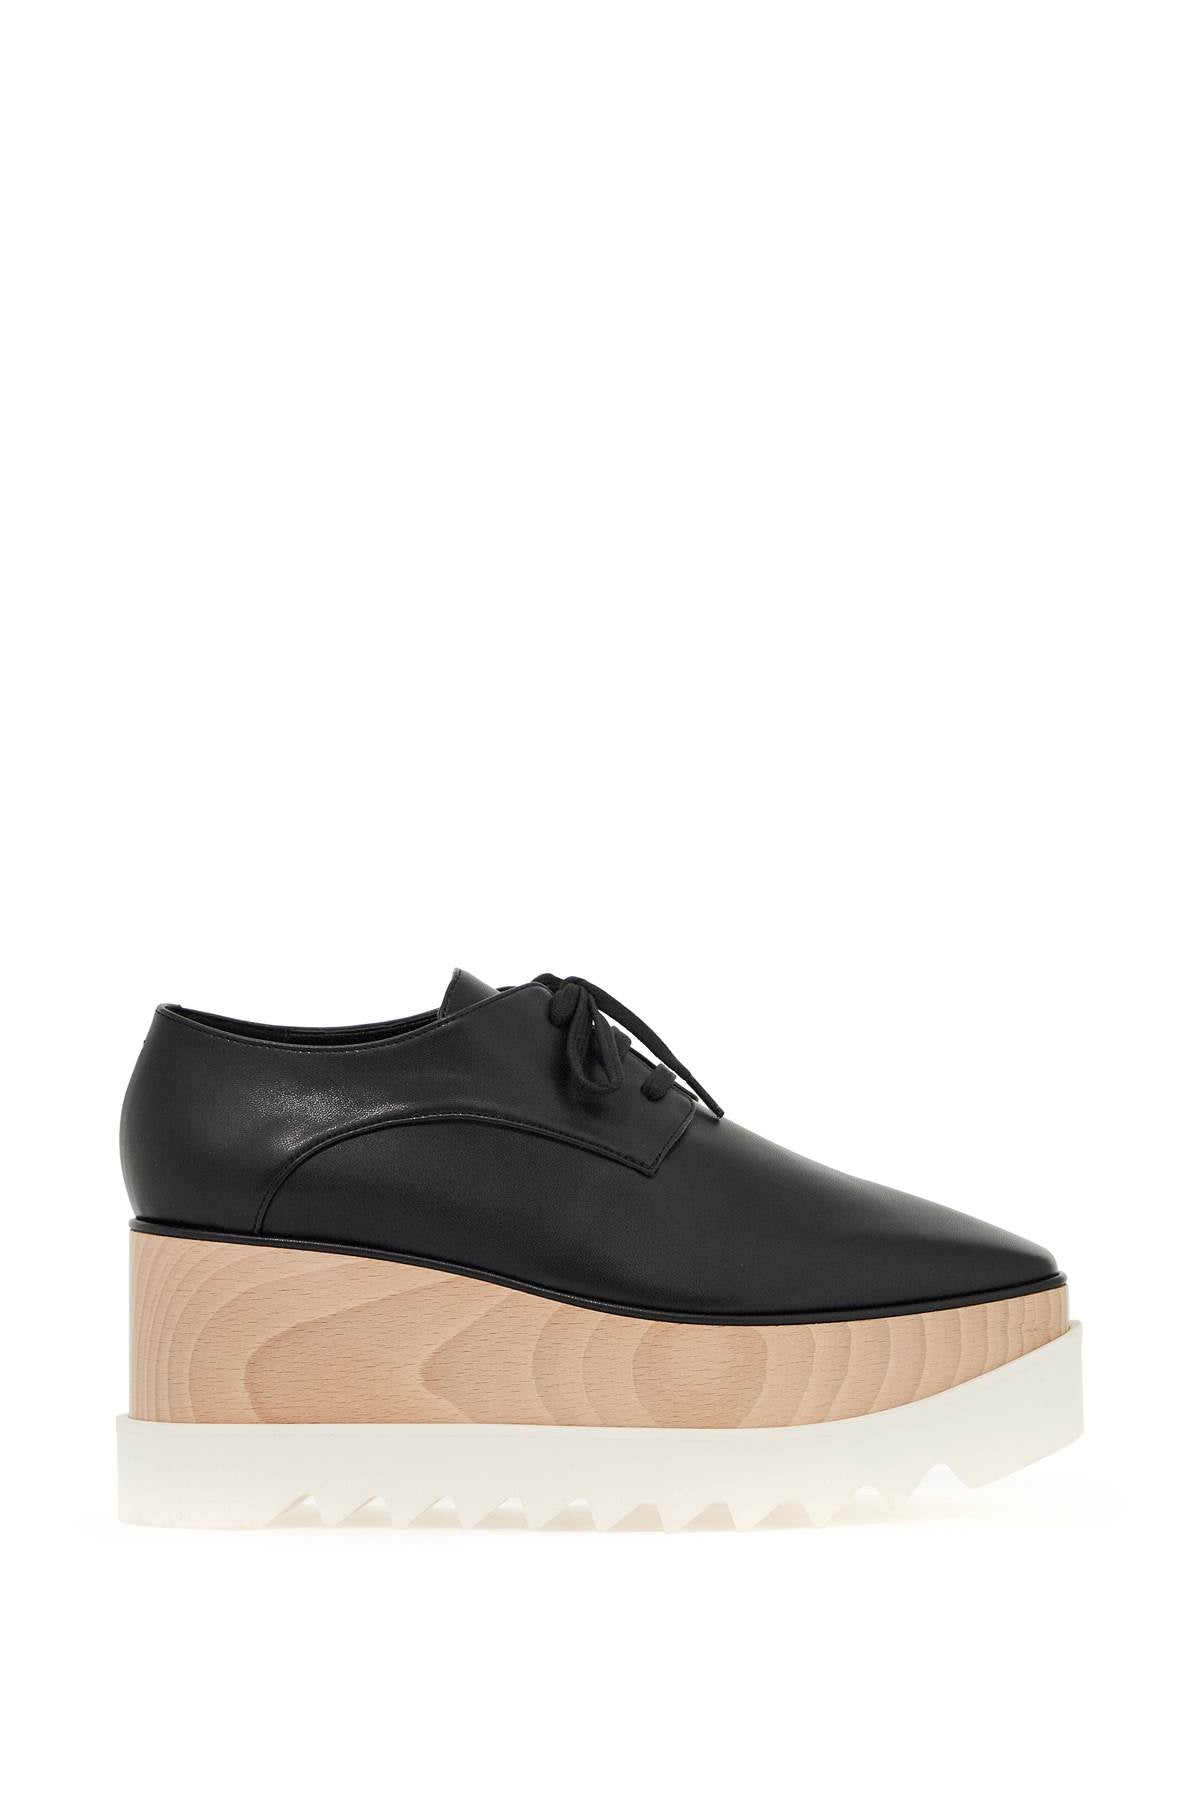 Stella Mccartney Elyse Lace Up Shoes In Black